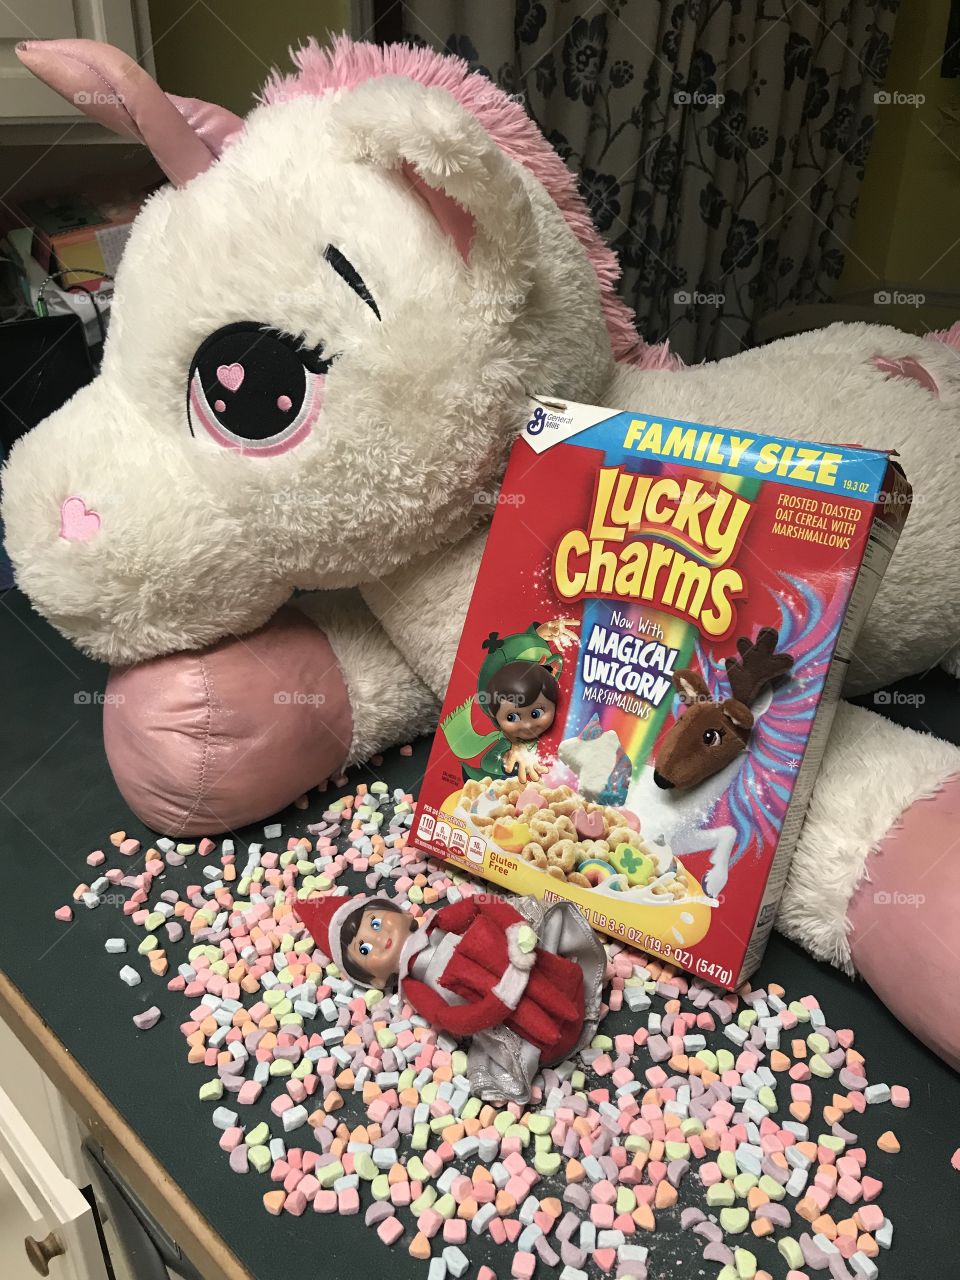 Elf on the Shelf Mischief- Magical Unicorn Lucky Charms cereal. 